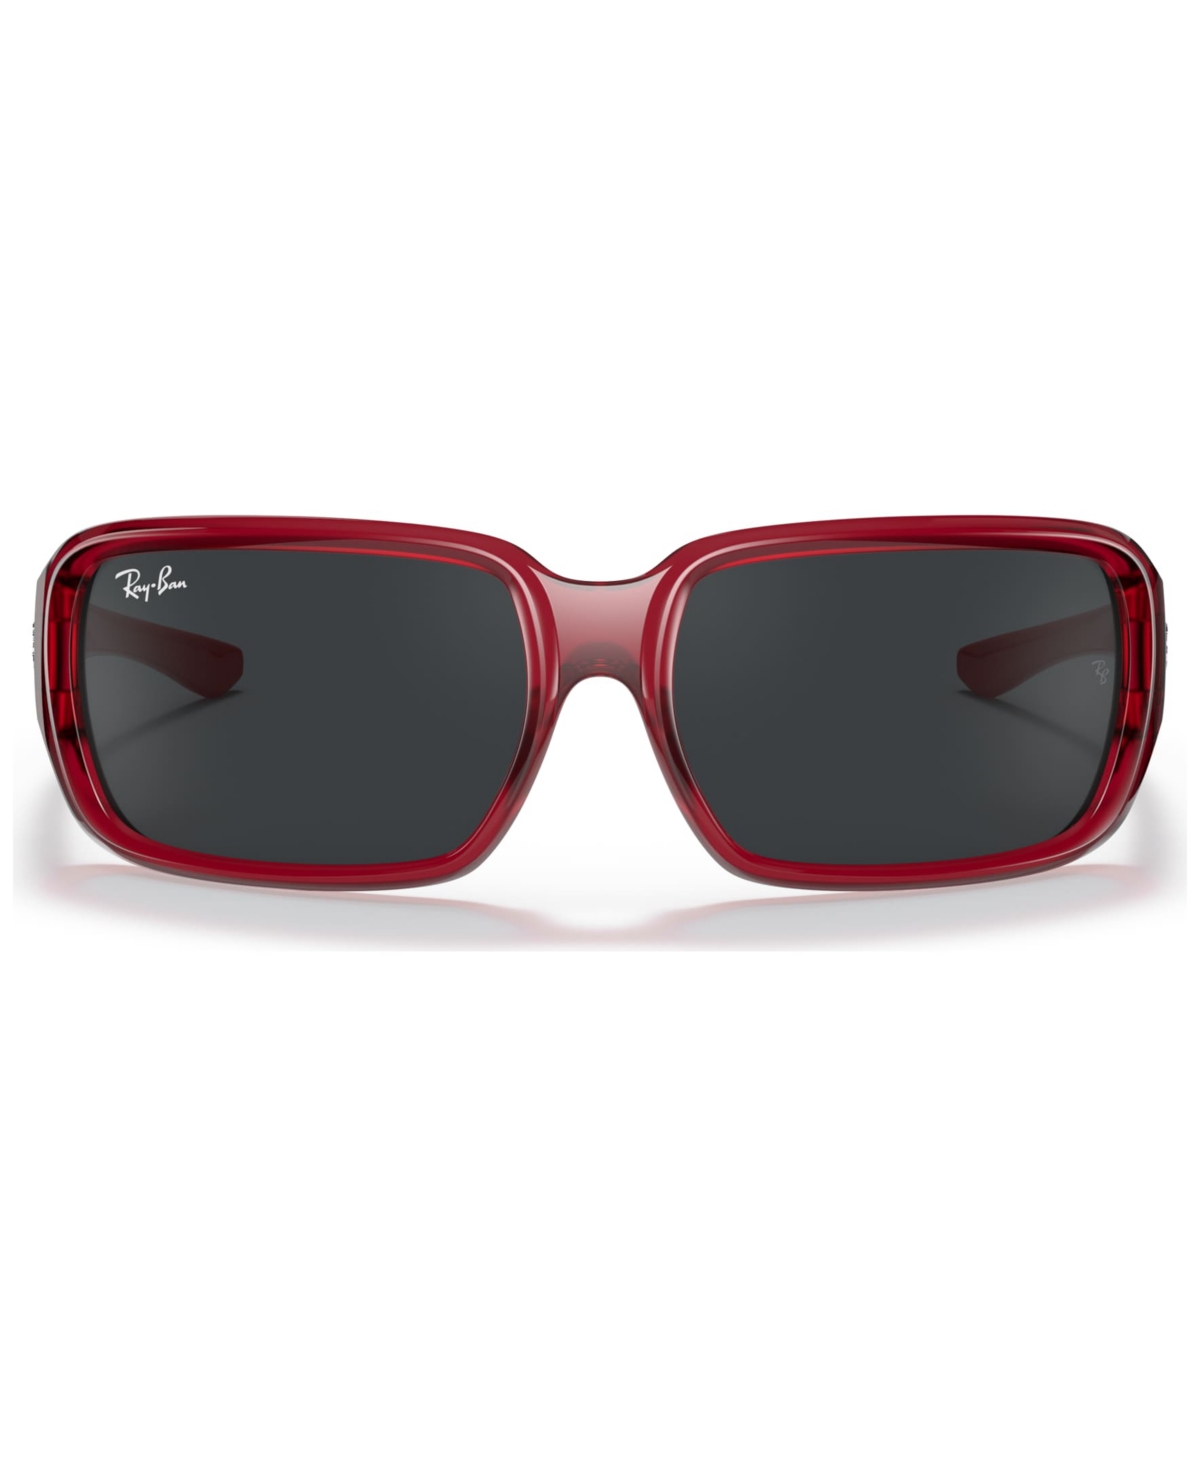 Ray-ban Jr . Kids Unisex Sunglasses, Rj9072s (ages 7-10) In Transparent Red,dark Grey